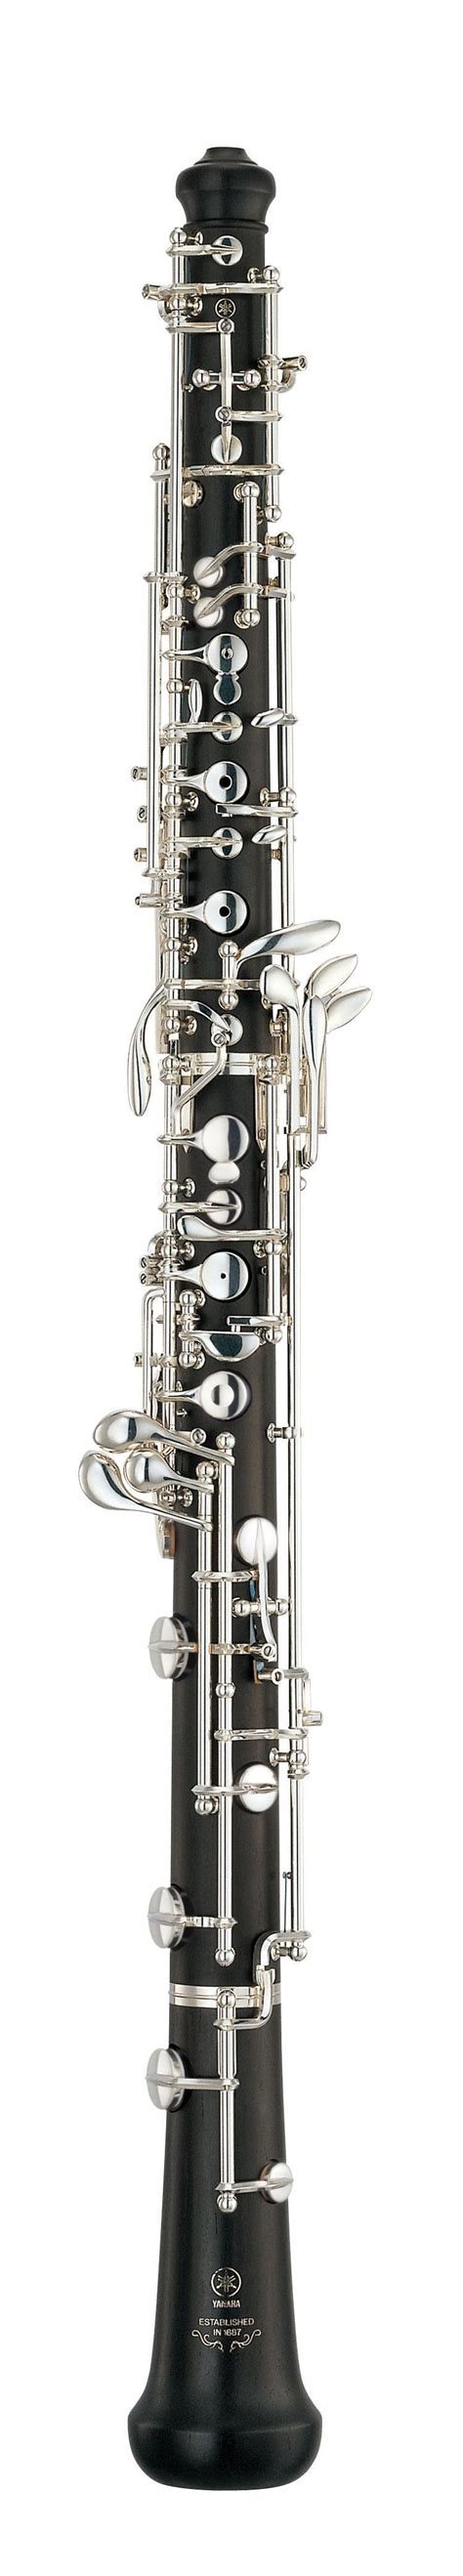 Yob 431m432m Overview Oboes Brass And Woodwinds Musical